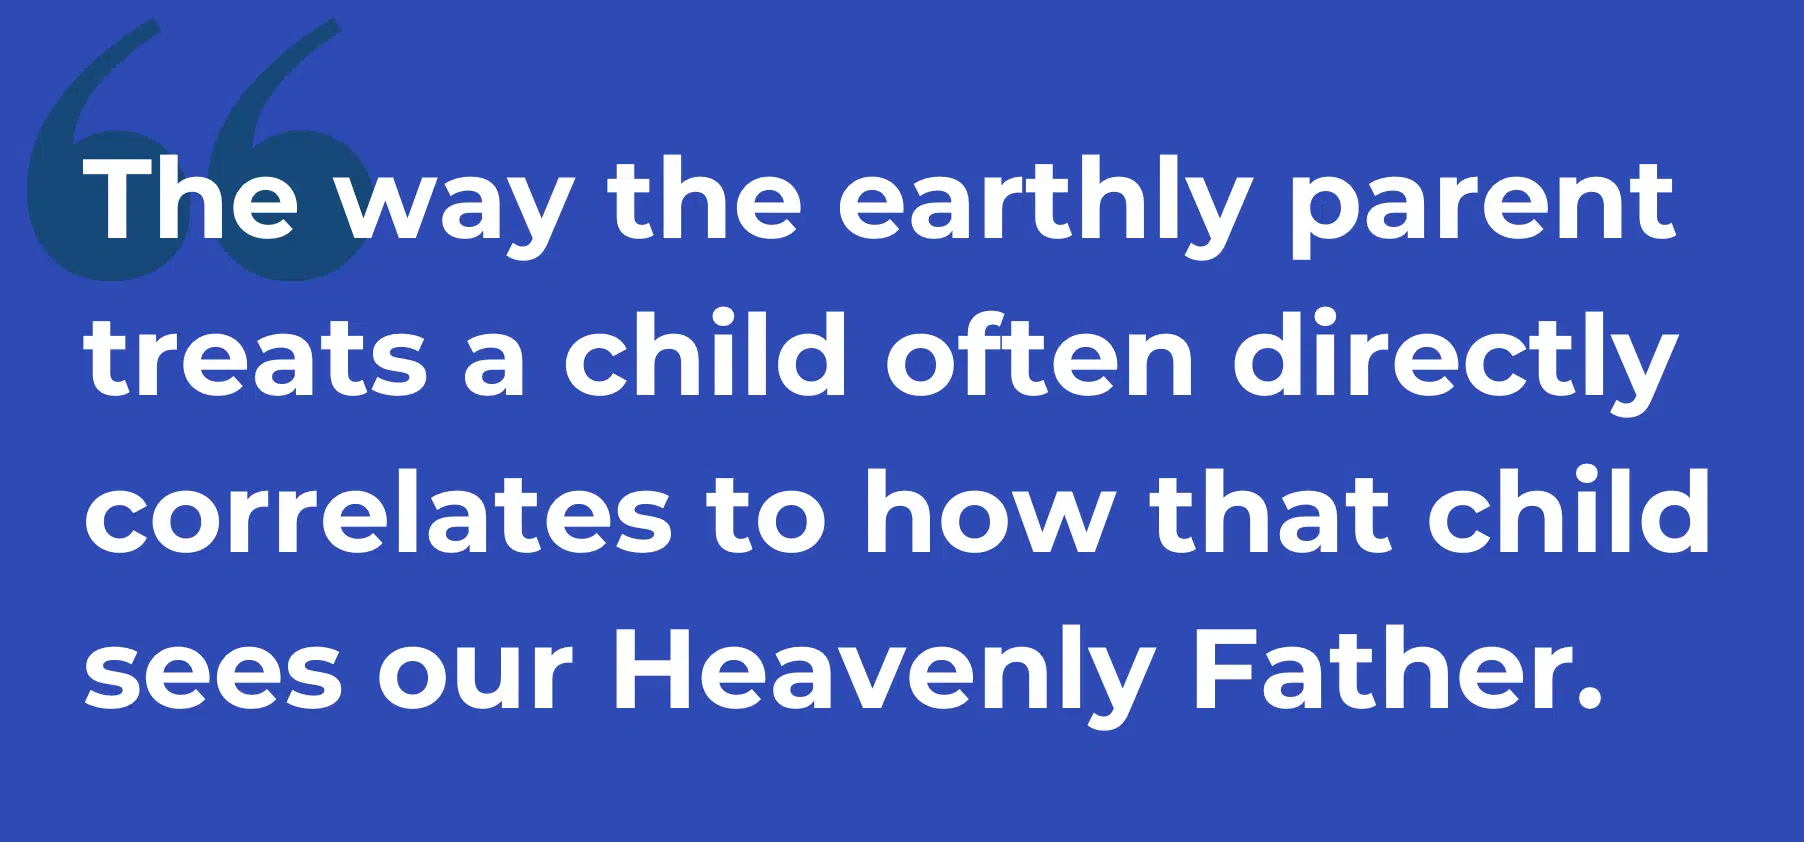 The way the earthly parent treats a child often directly correlates to how that child sees our Heavenly Father.